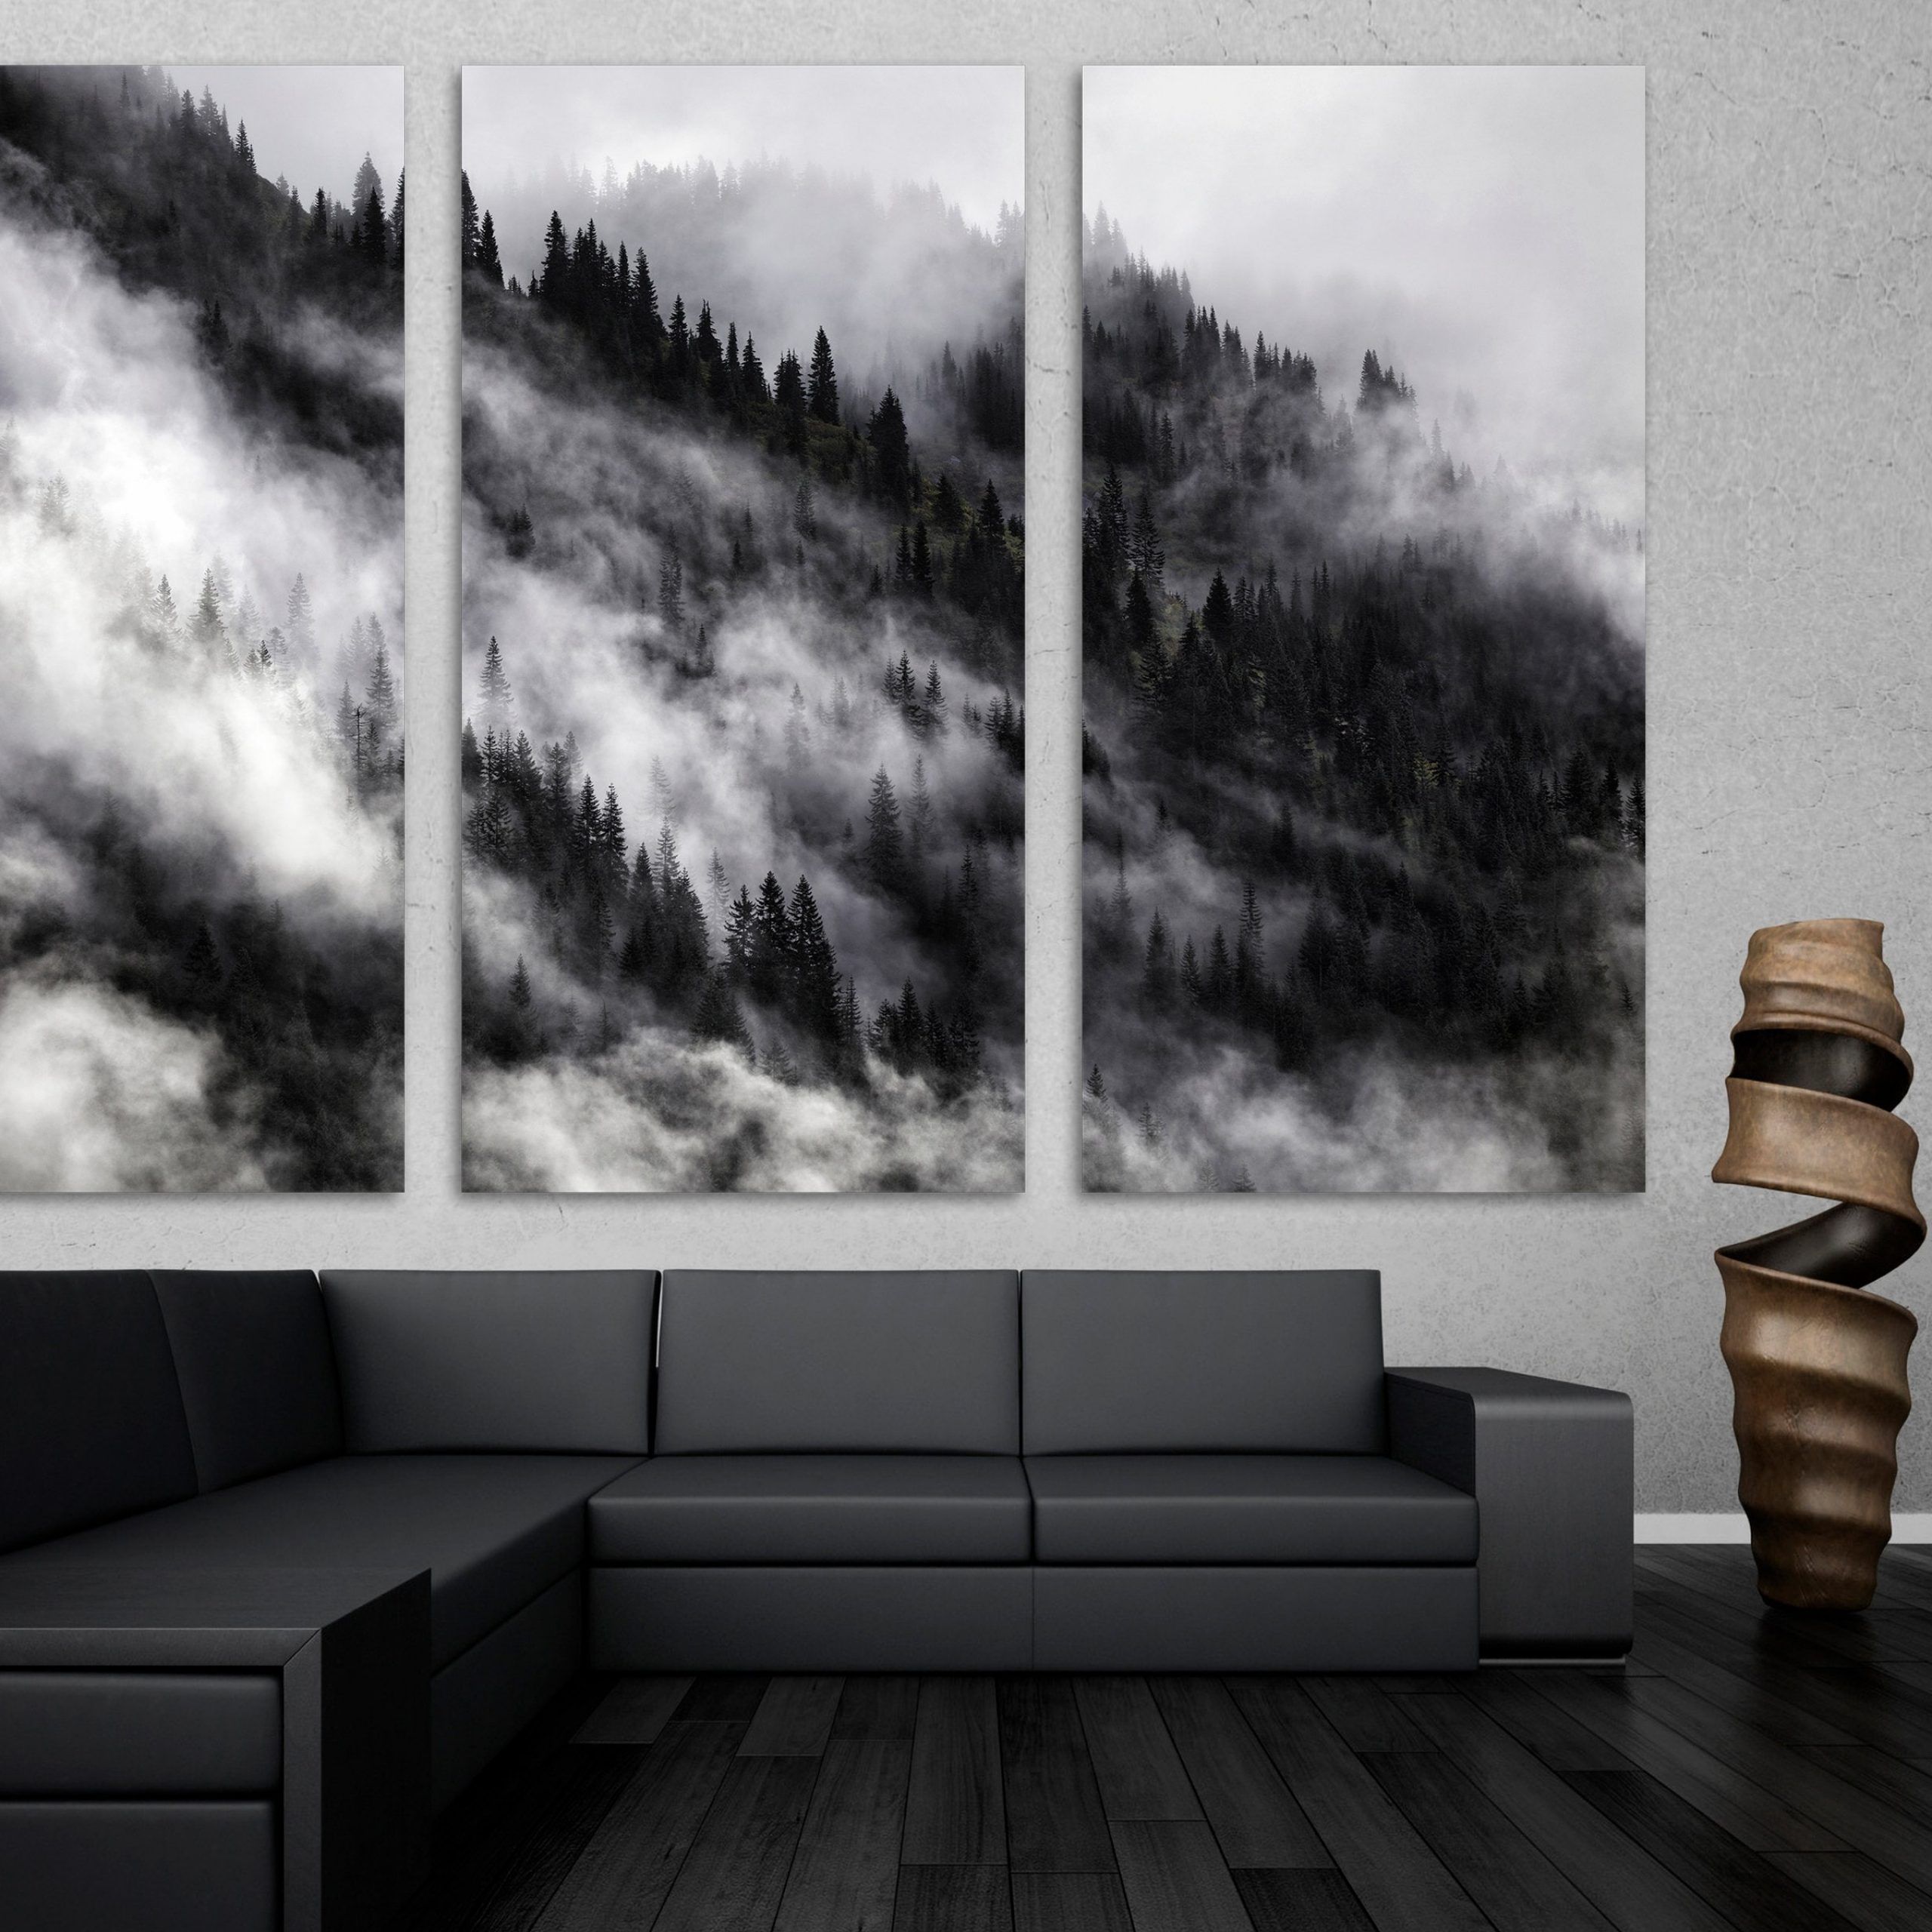 Misty Pines Print – Etsy Pertaining To Most Recently Released Misty Pines Wall Art (View 6 of 15)